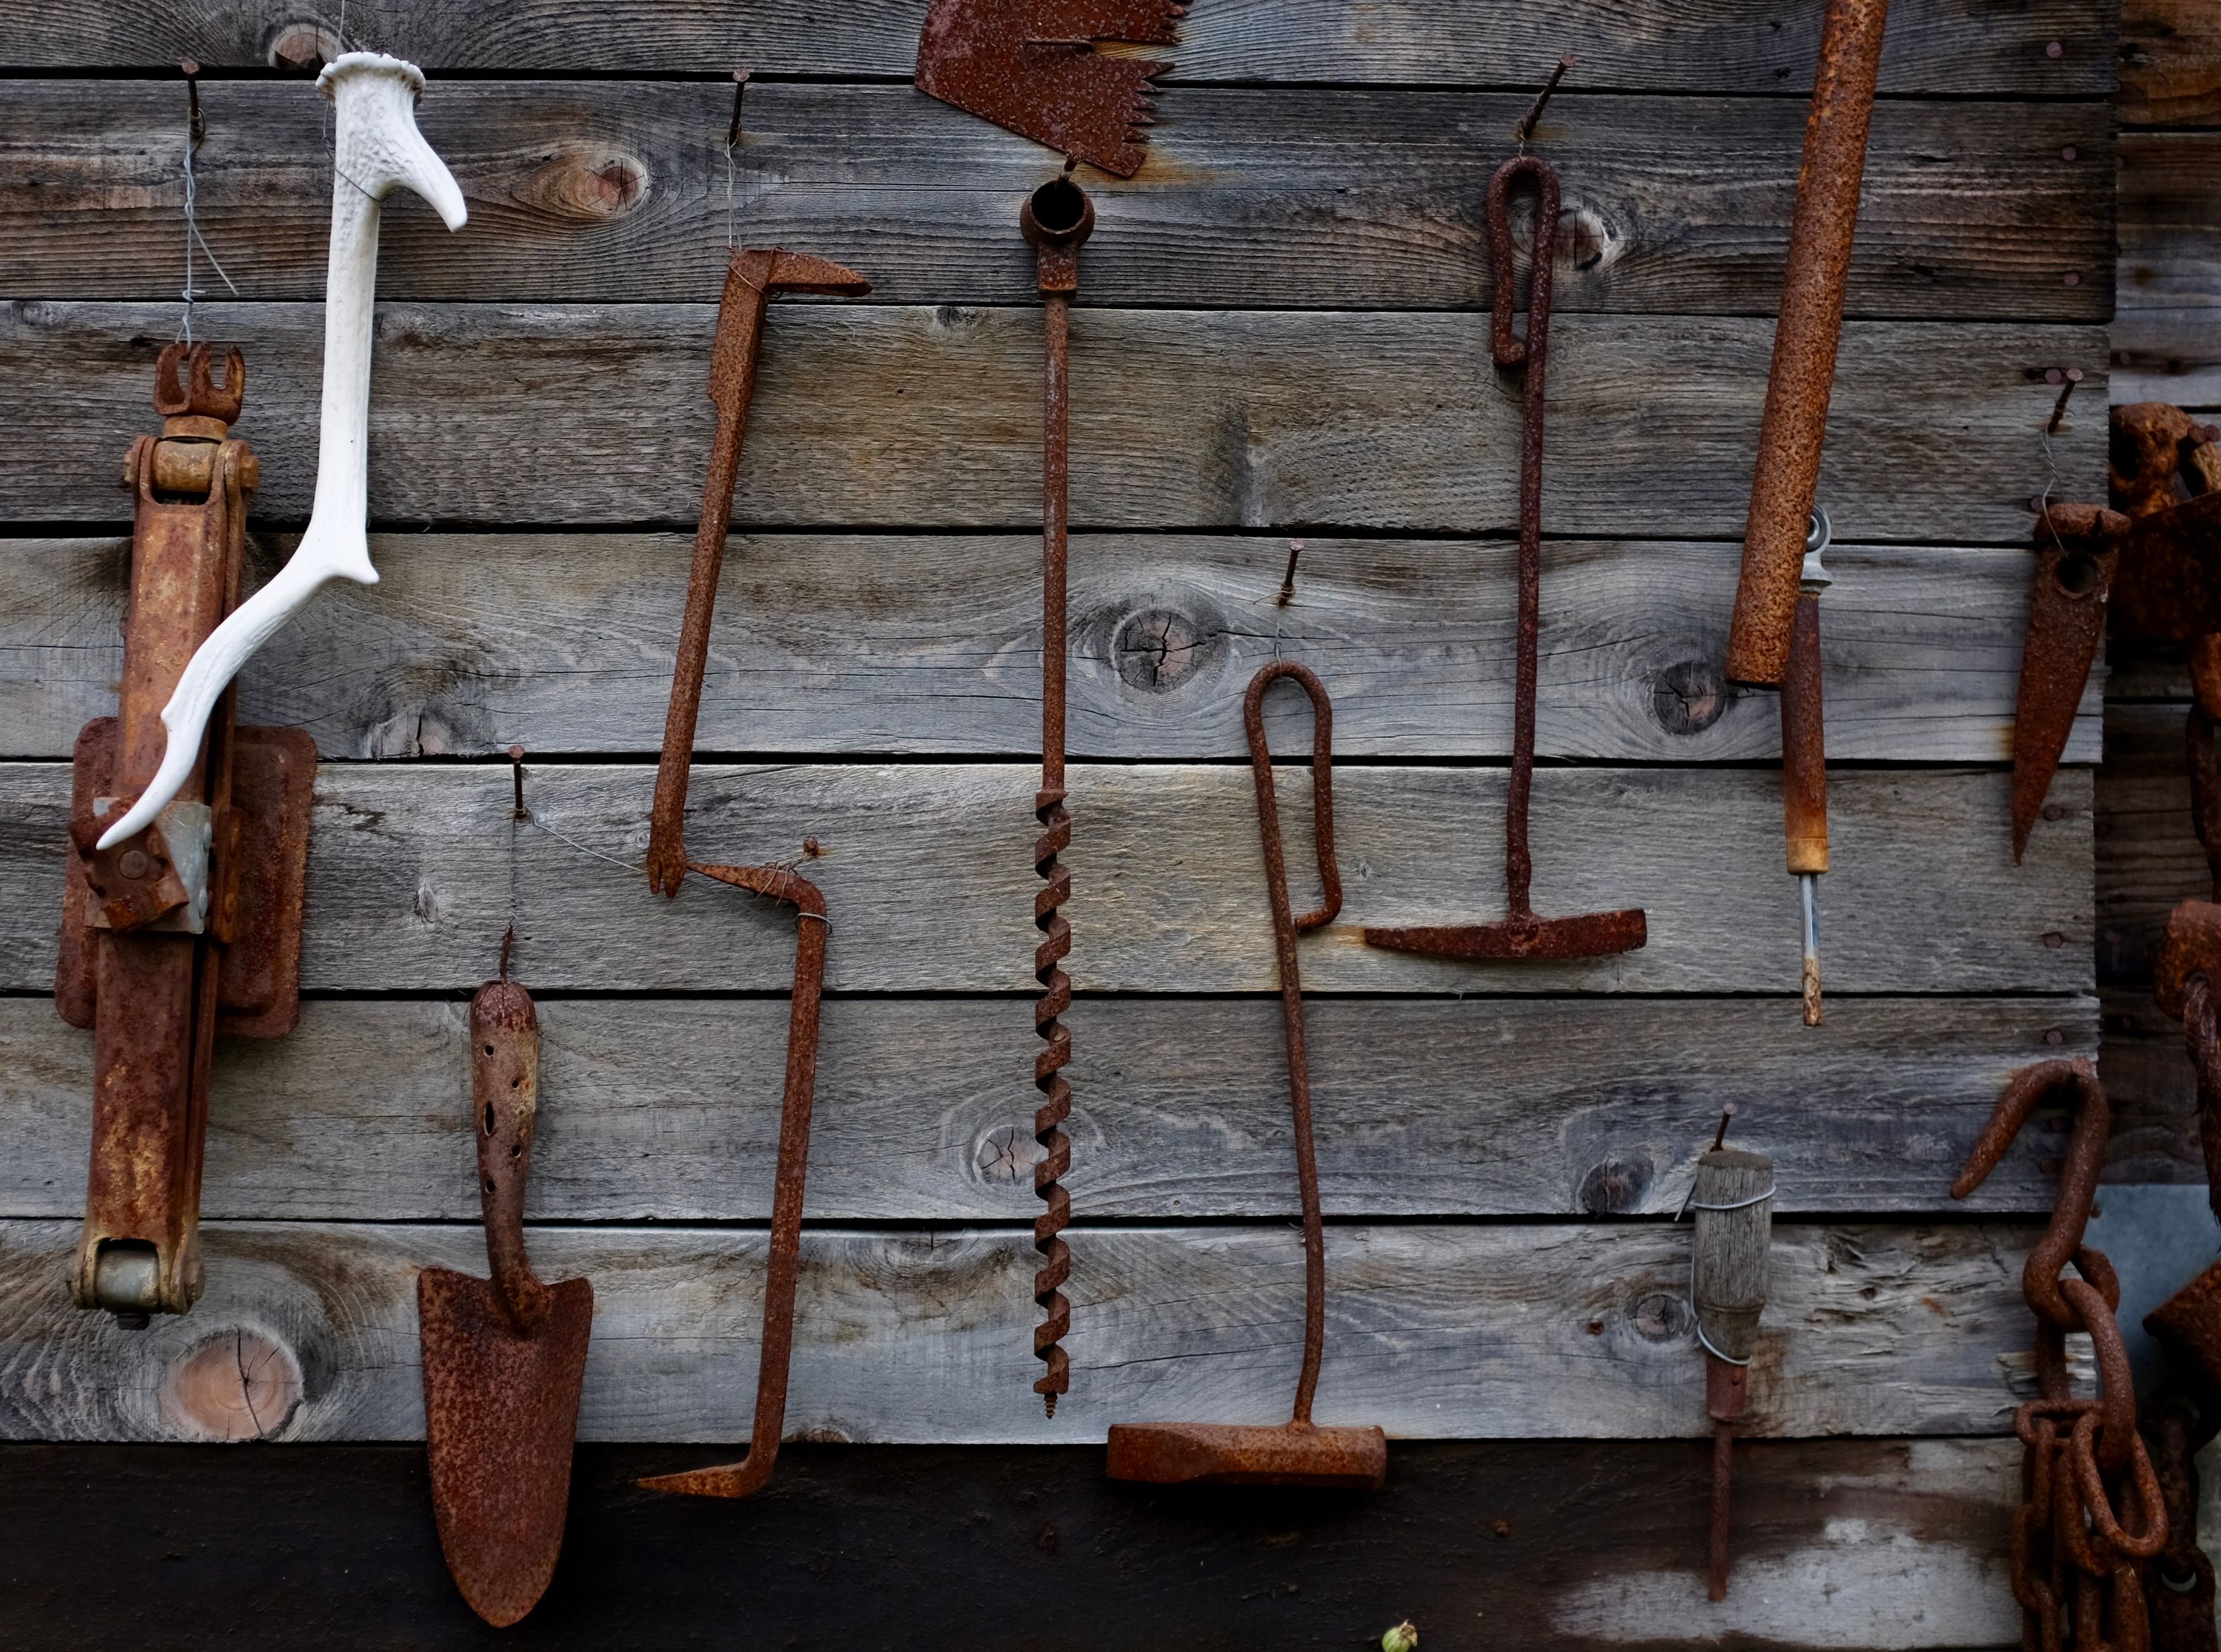 Rusty tools and a single antler hang from a weather-beaten clapboard wall.